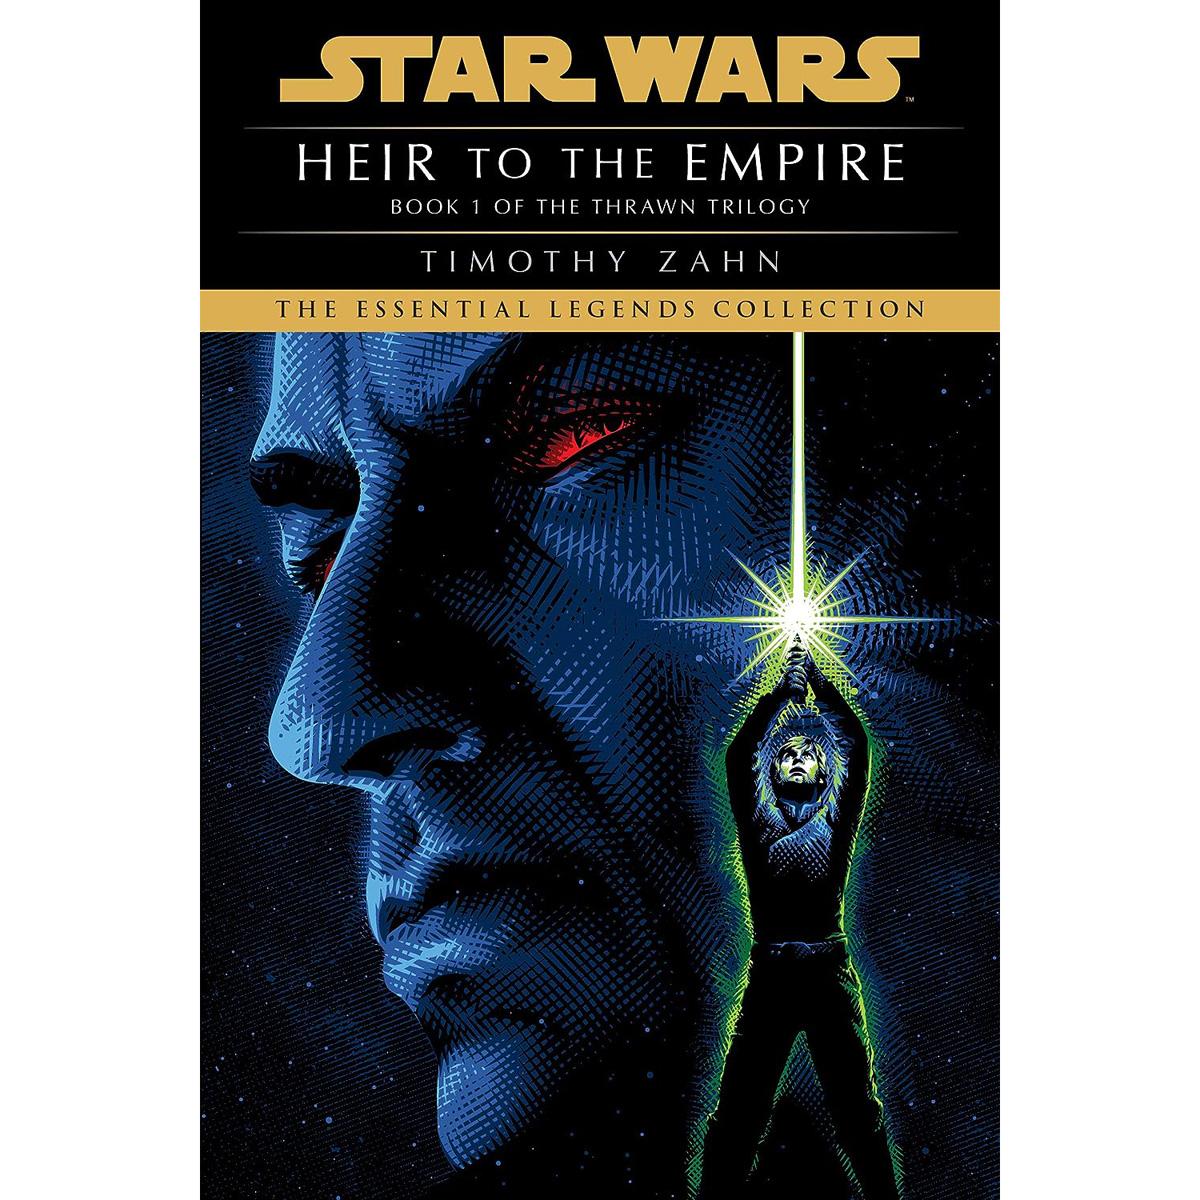 Star Wars Heir to the Empire The Thrawn Trilogy Book eBook for $1.99